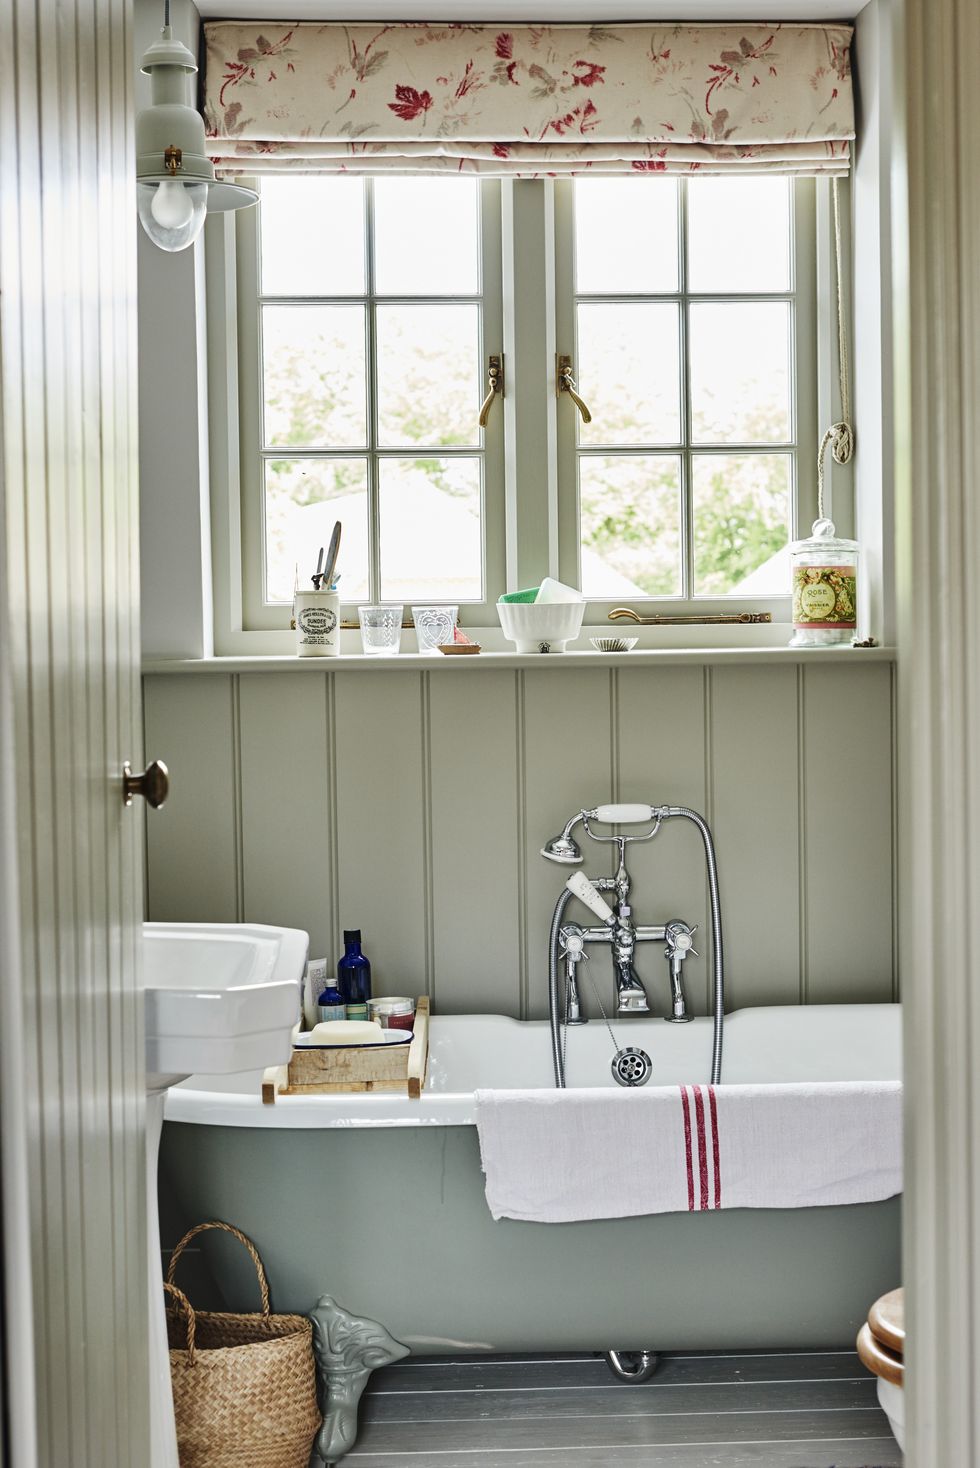 30 Best Clawfoot Tub Ideas for Your Bathroom - Decorating with Clawfoot ...